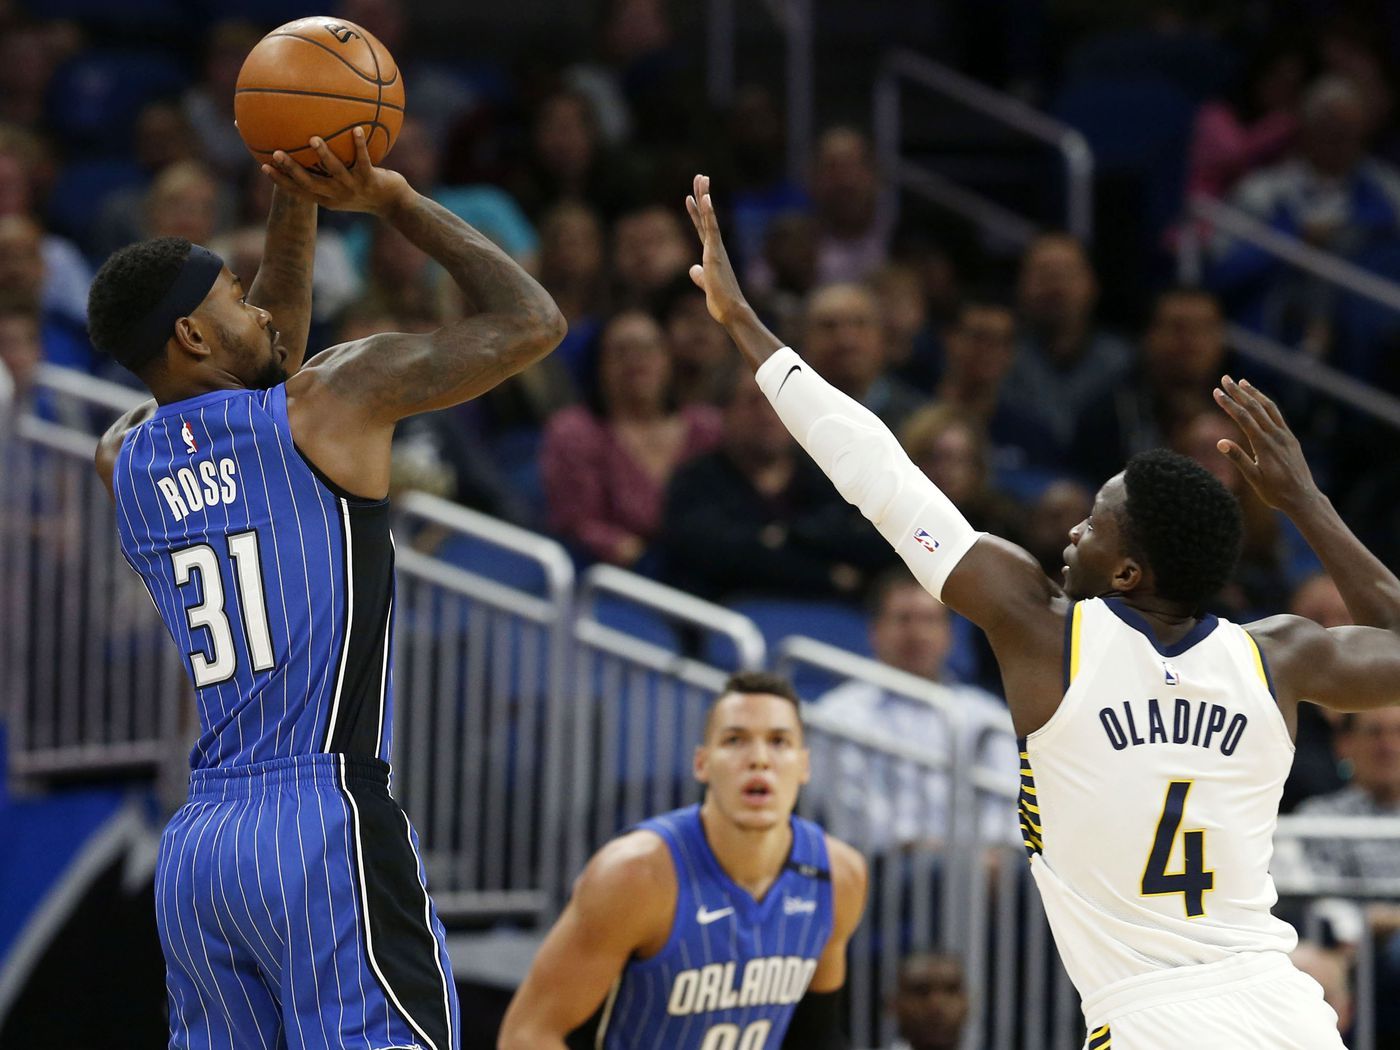 Terrence Ross will play a key role for the Magic this season Pinstriped Post